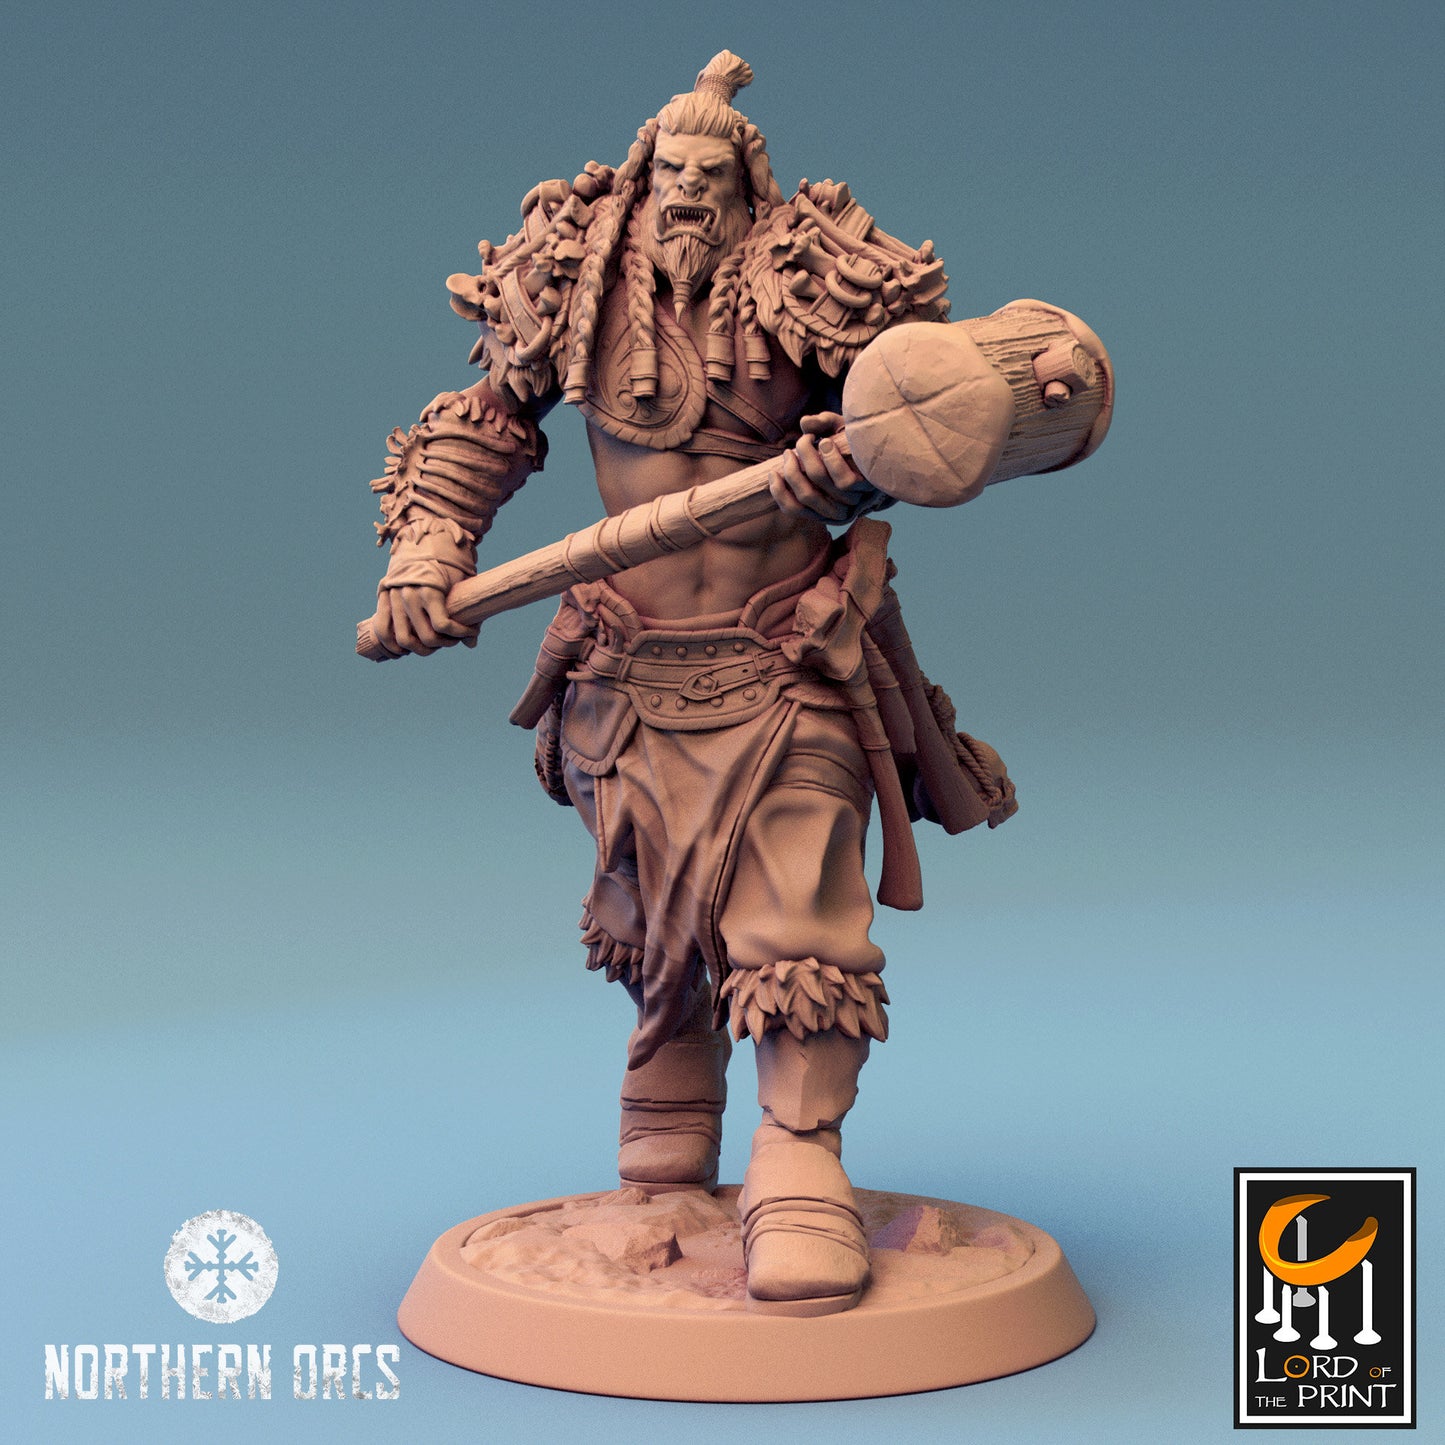 Northern Orc Soldiers by Lord of the Print | Please Read Description